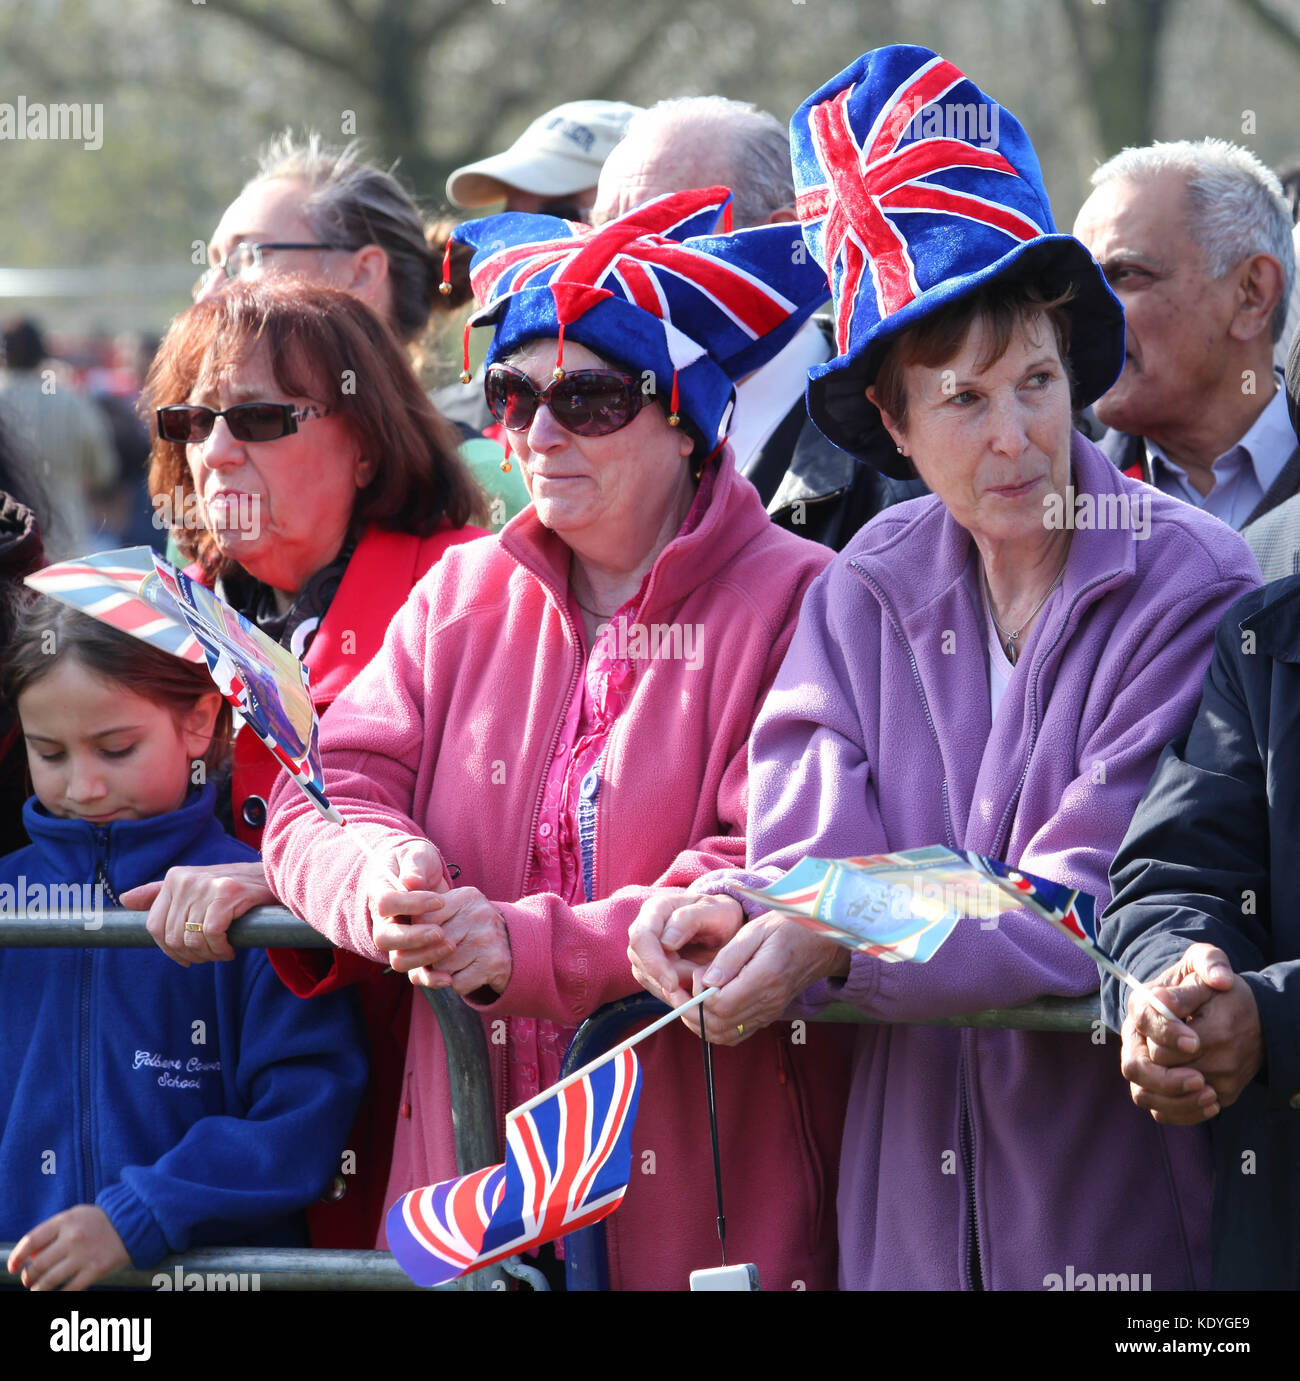 LONDON, ENGLAND - MARCH 29: Crowds cheer as Queen Elizabeth II arrives in Valentine's Park Redbridge as part of her Diamond Jubilee tour of the UK on March 29, 2012 in London, England   People:  Queen Elizabeth II  Transmission Ref:  MNCUK1   Credit: Hoo-Me.com/MediaPunch ***NO UK*** Stock Photo